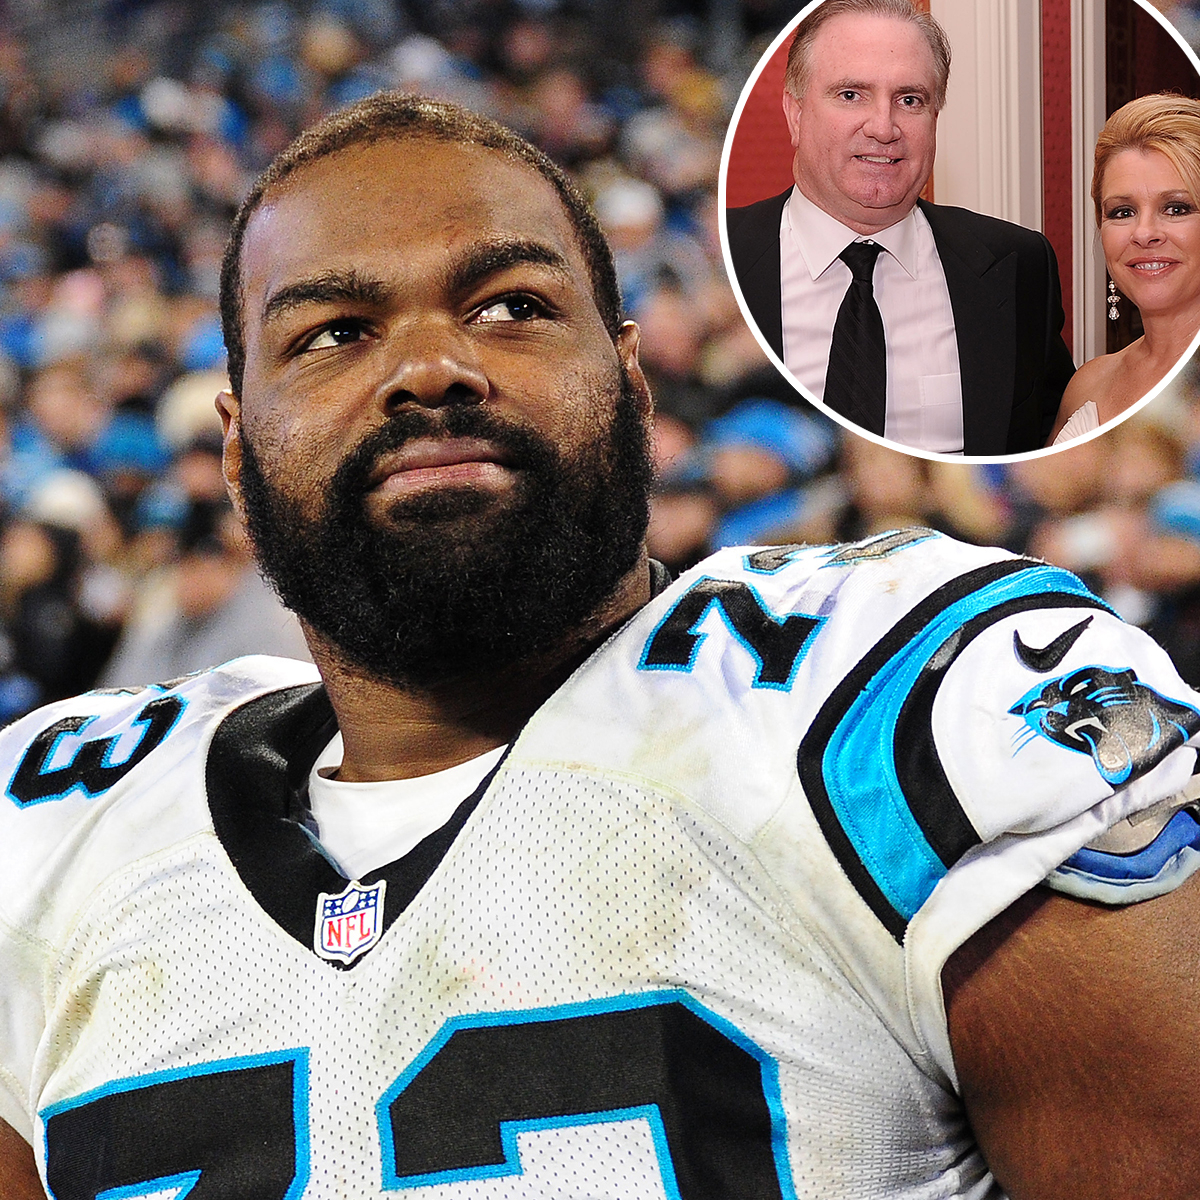 Michael Oher’s Former Football Coach Reacts to “Sad” Tuohy Lawsuit